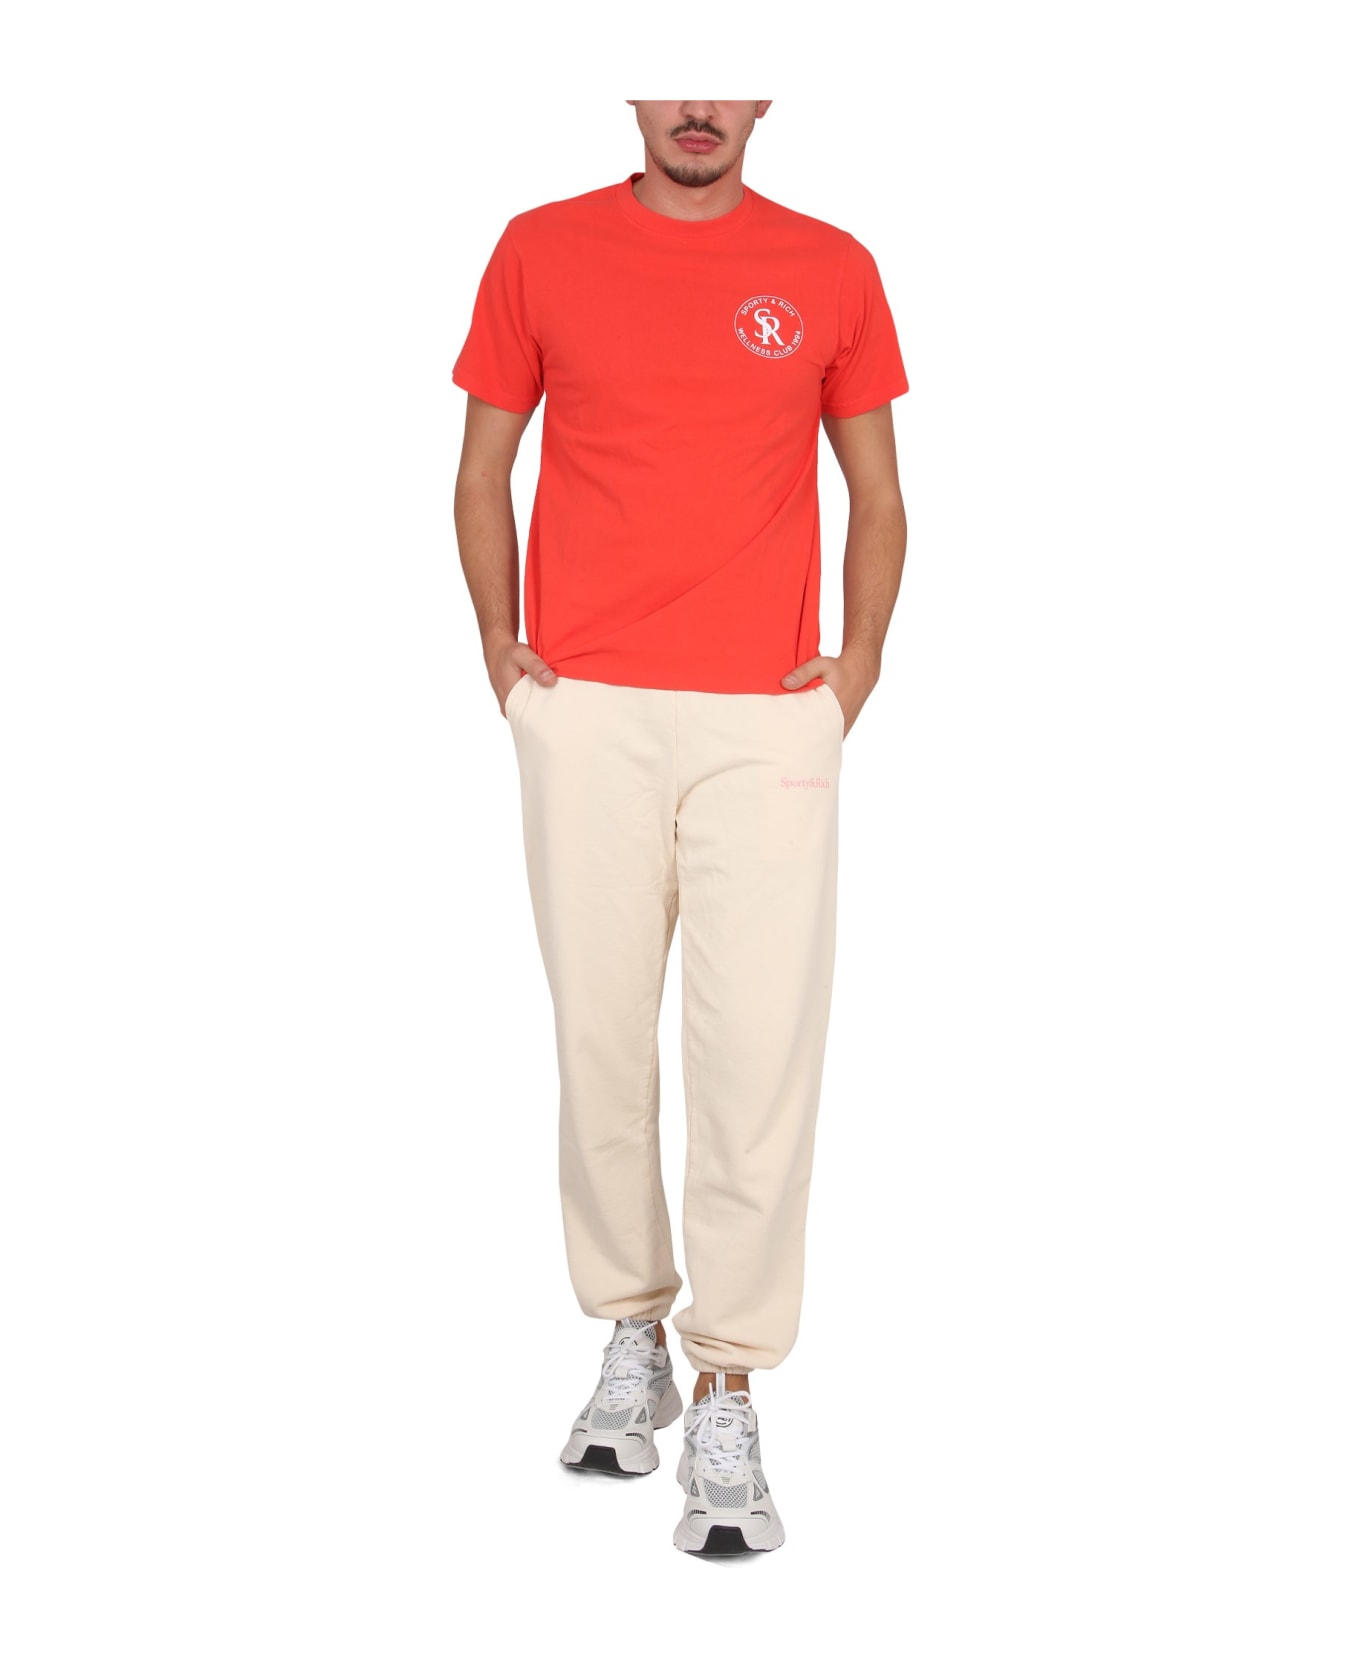 Sporty & Rich T-shirt With Logo - ROSSO